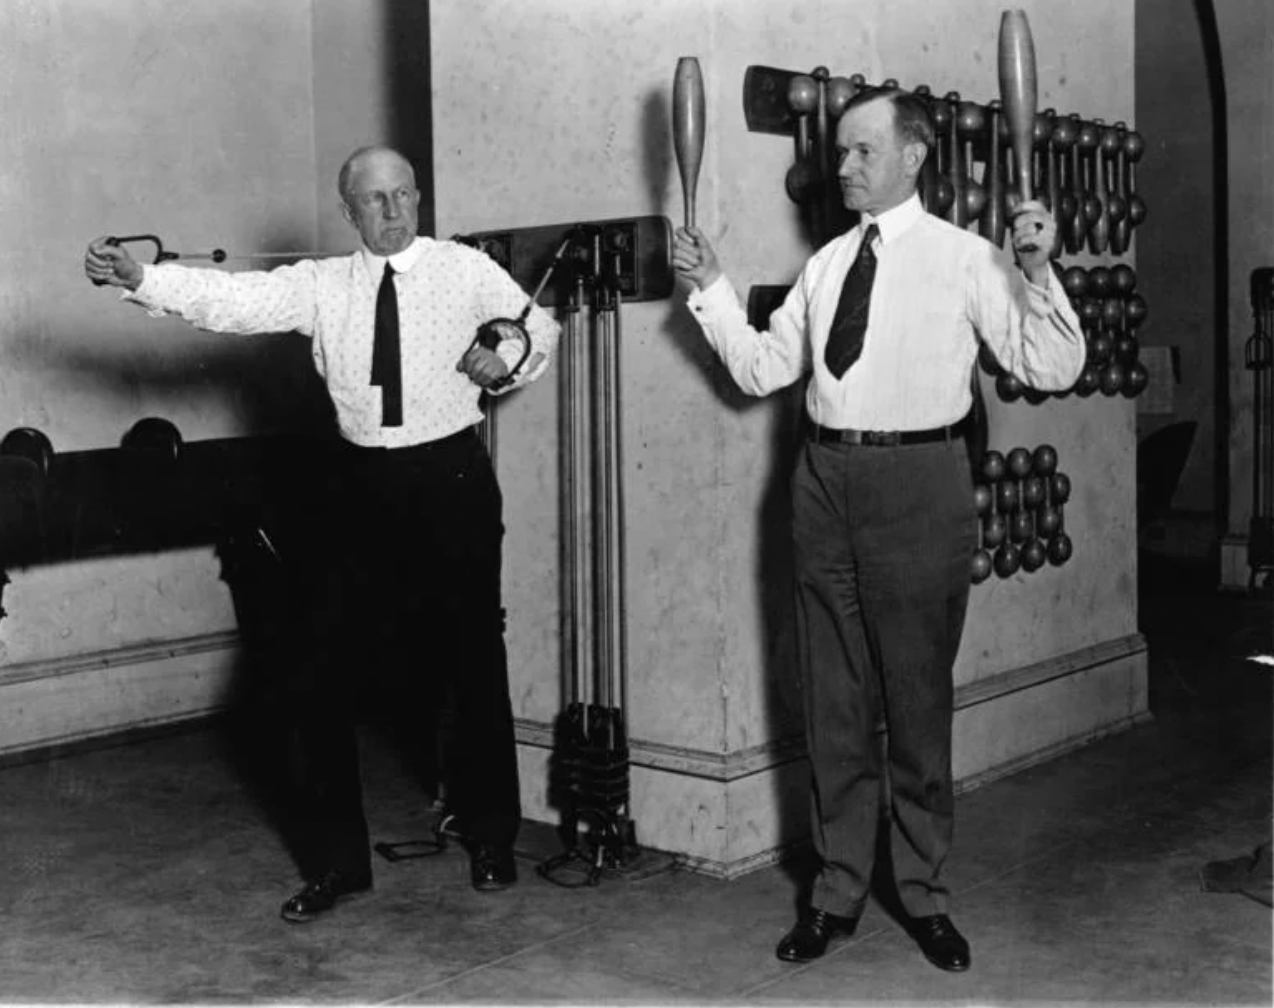 Calvin Coolidge and Speaker of the House Fredrick Gillett exercise in the Congressional gym. 1923.